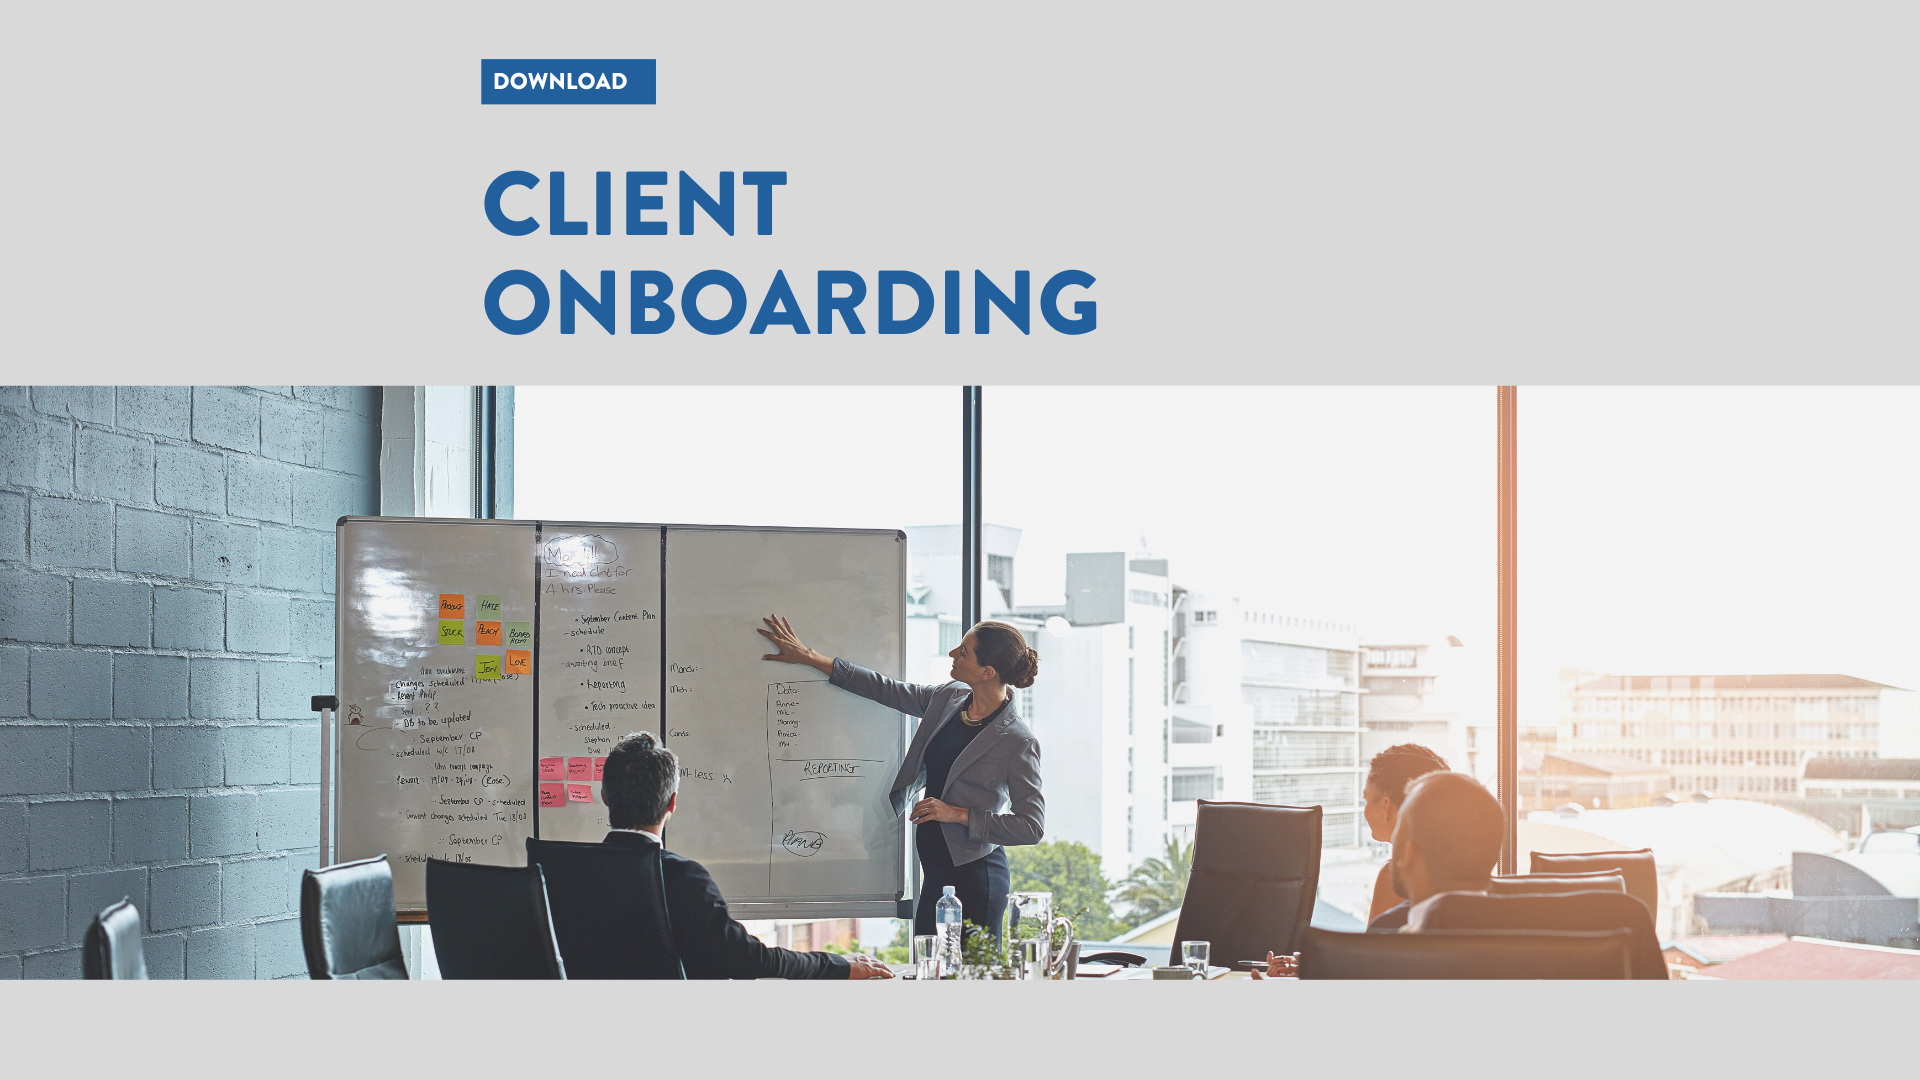 CLIENT ONBOARDING